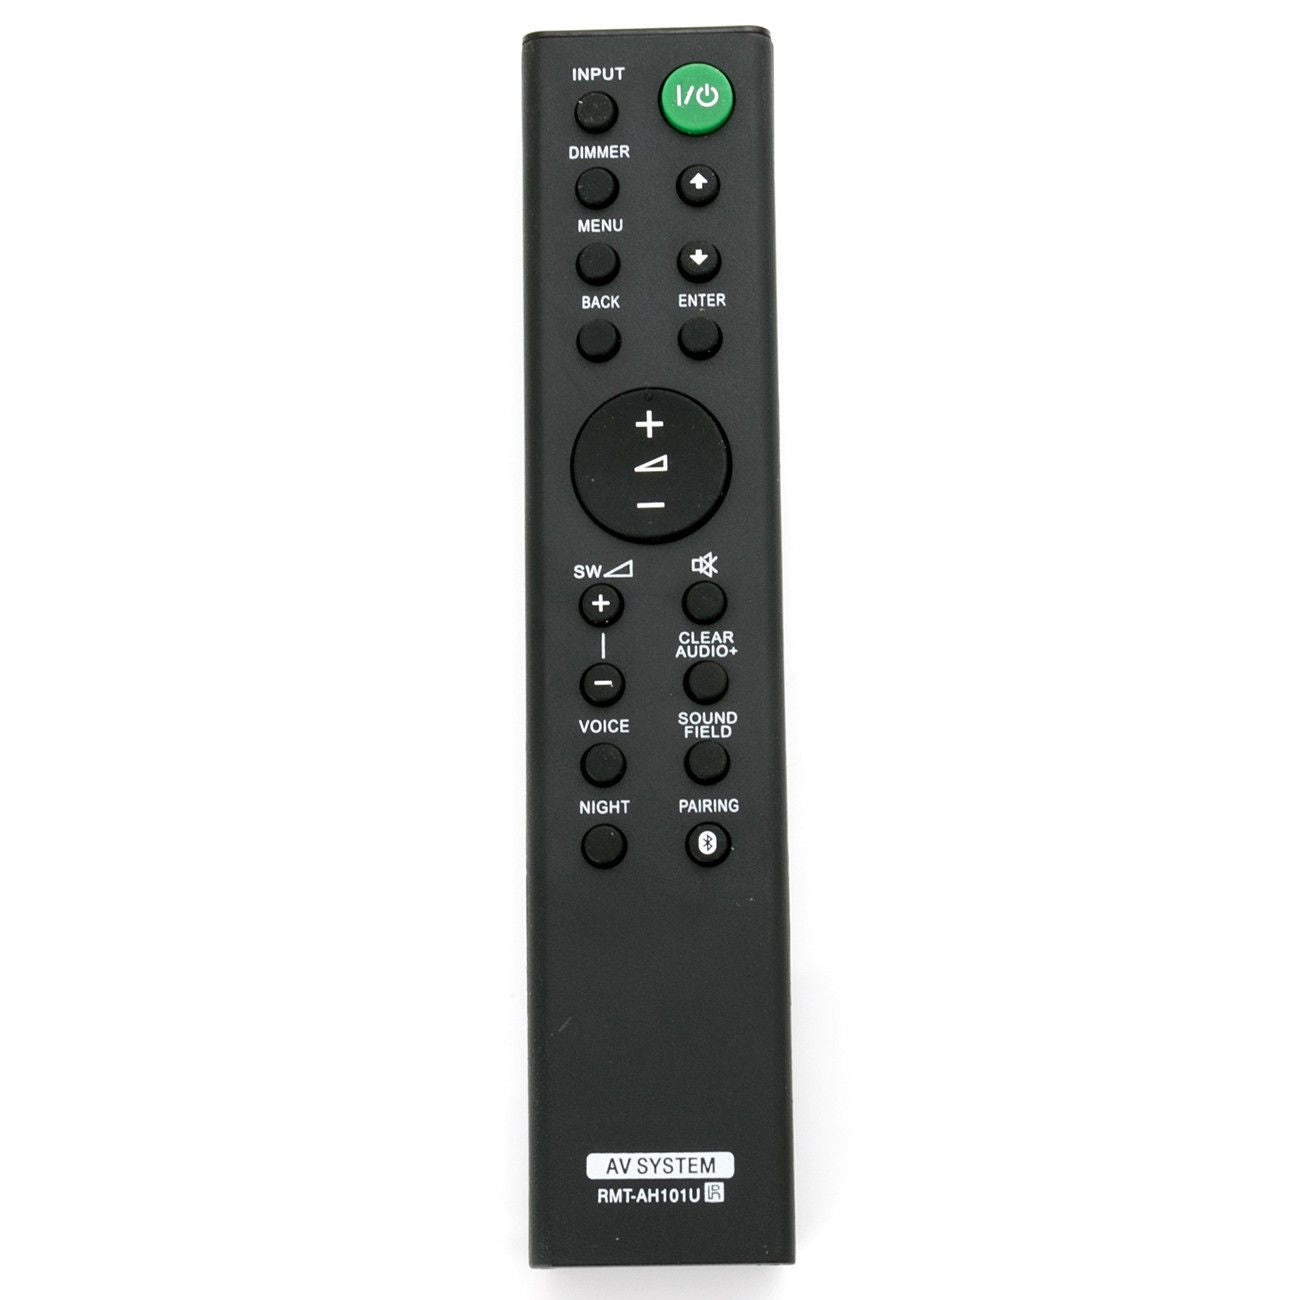 RMT-AH101U Replacement Remote Control for Sony Sound Bar HT-CT380 HT-CT780 HT-CT381